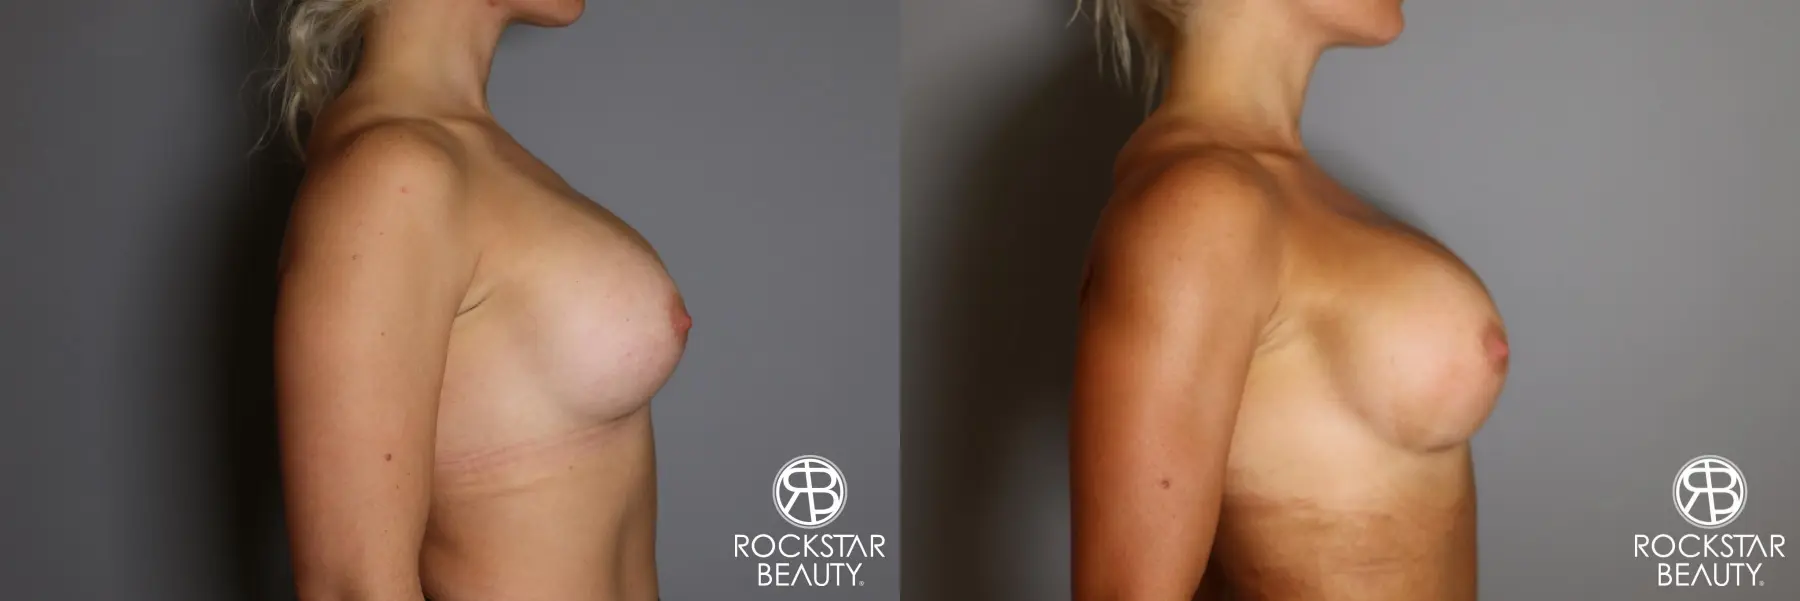 Breast Implant Exchange: Patient 9 - Before and After 3